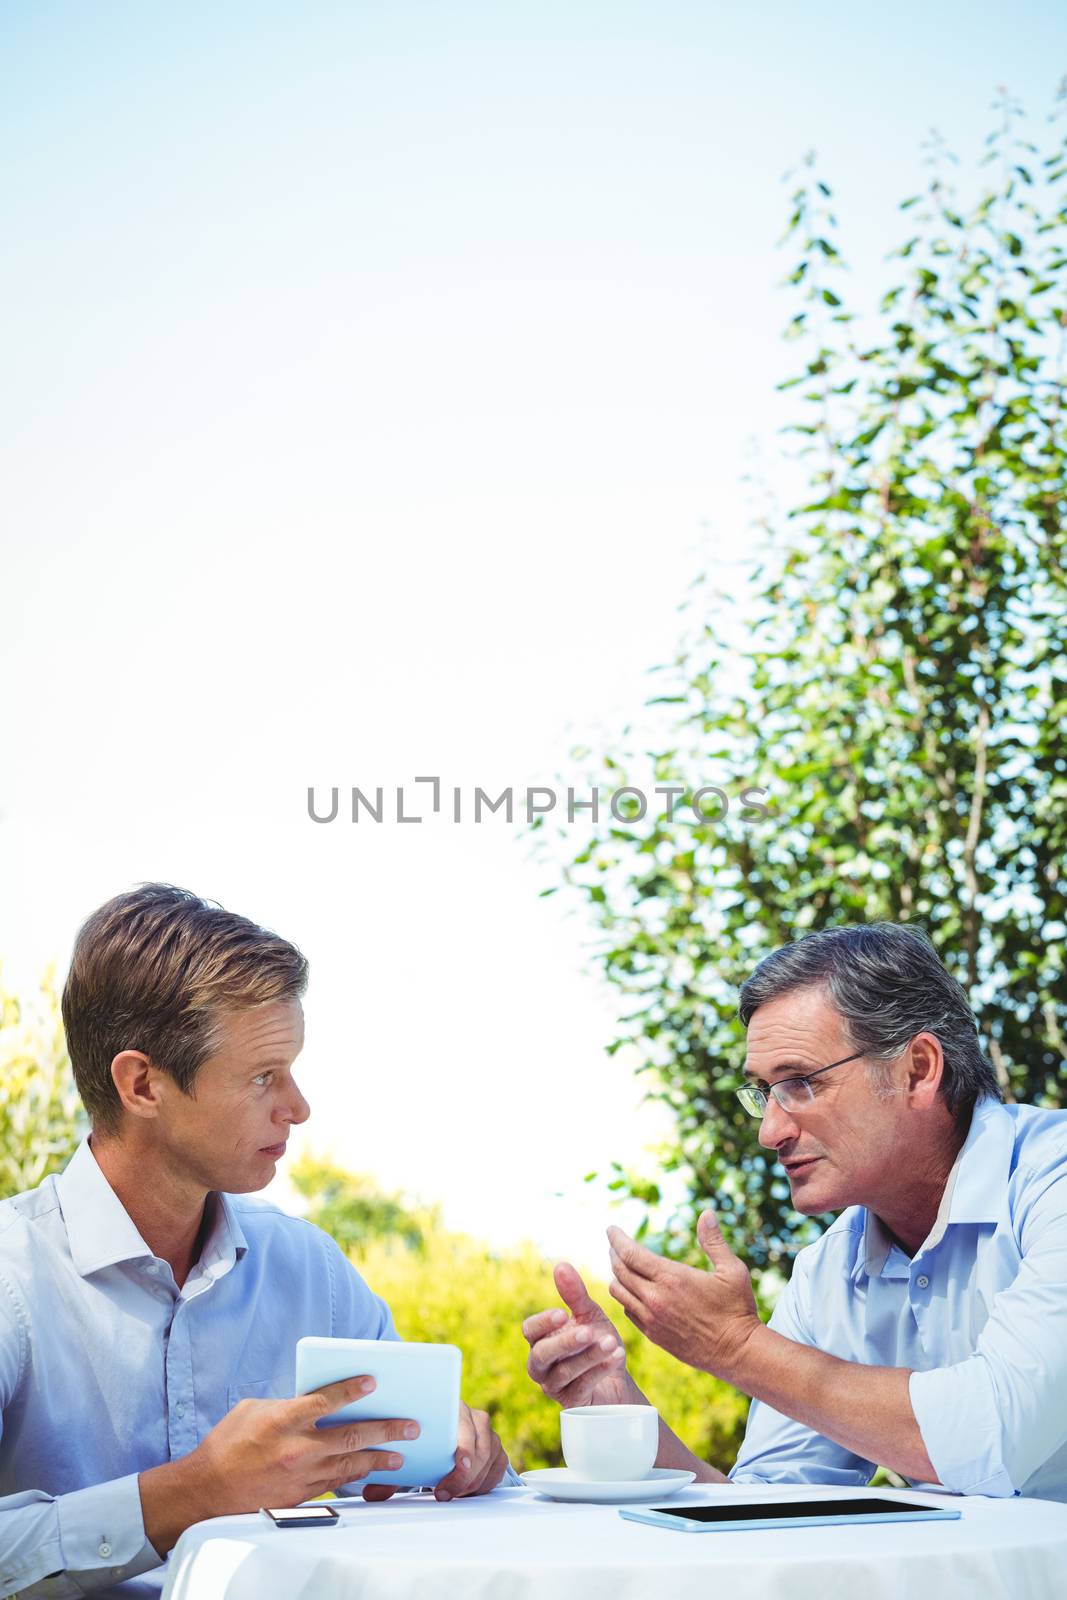 Two businessmen meeting in a restaurant using tablet in the garden